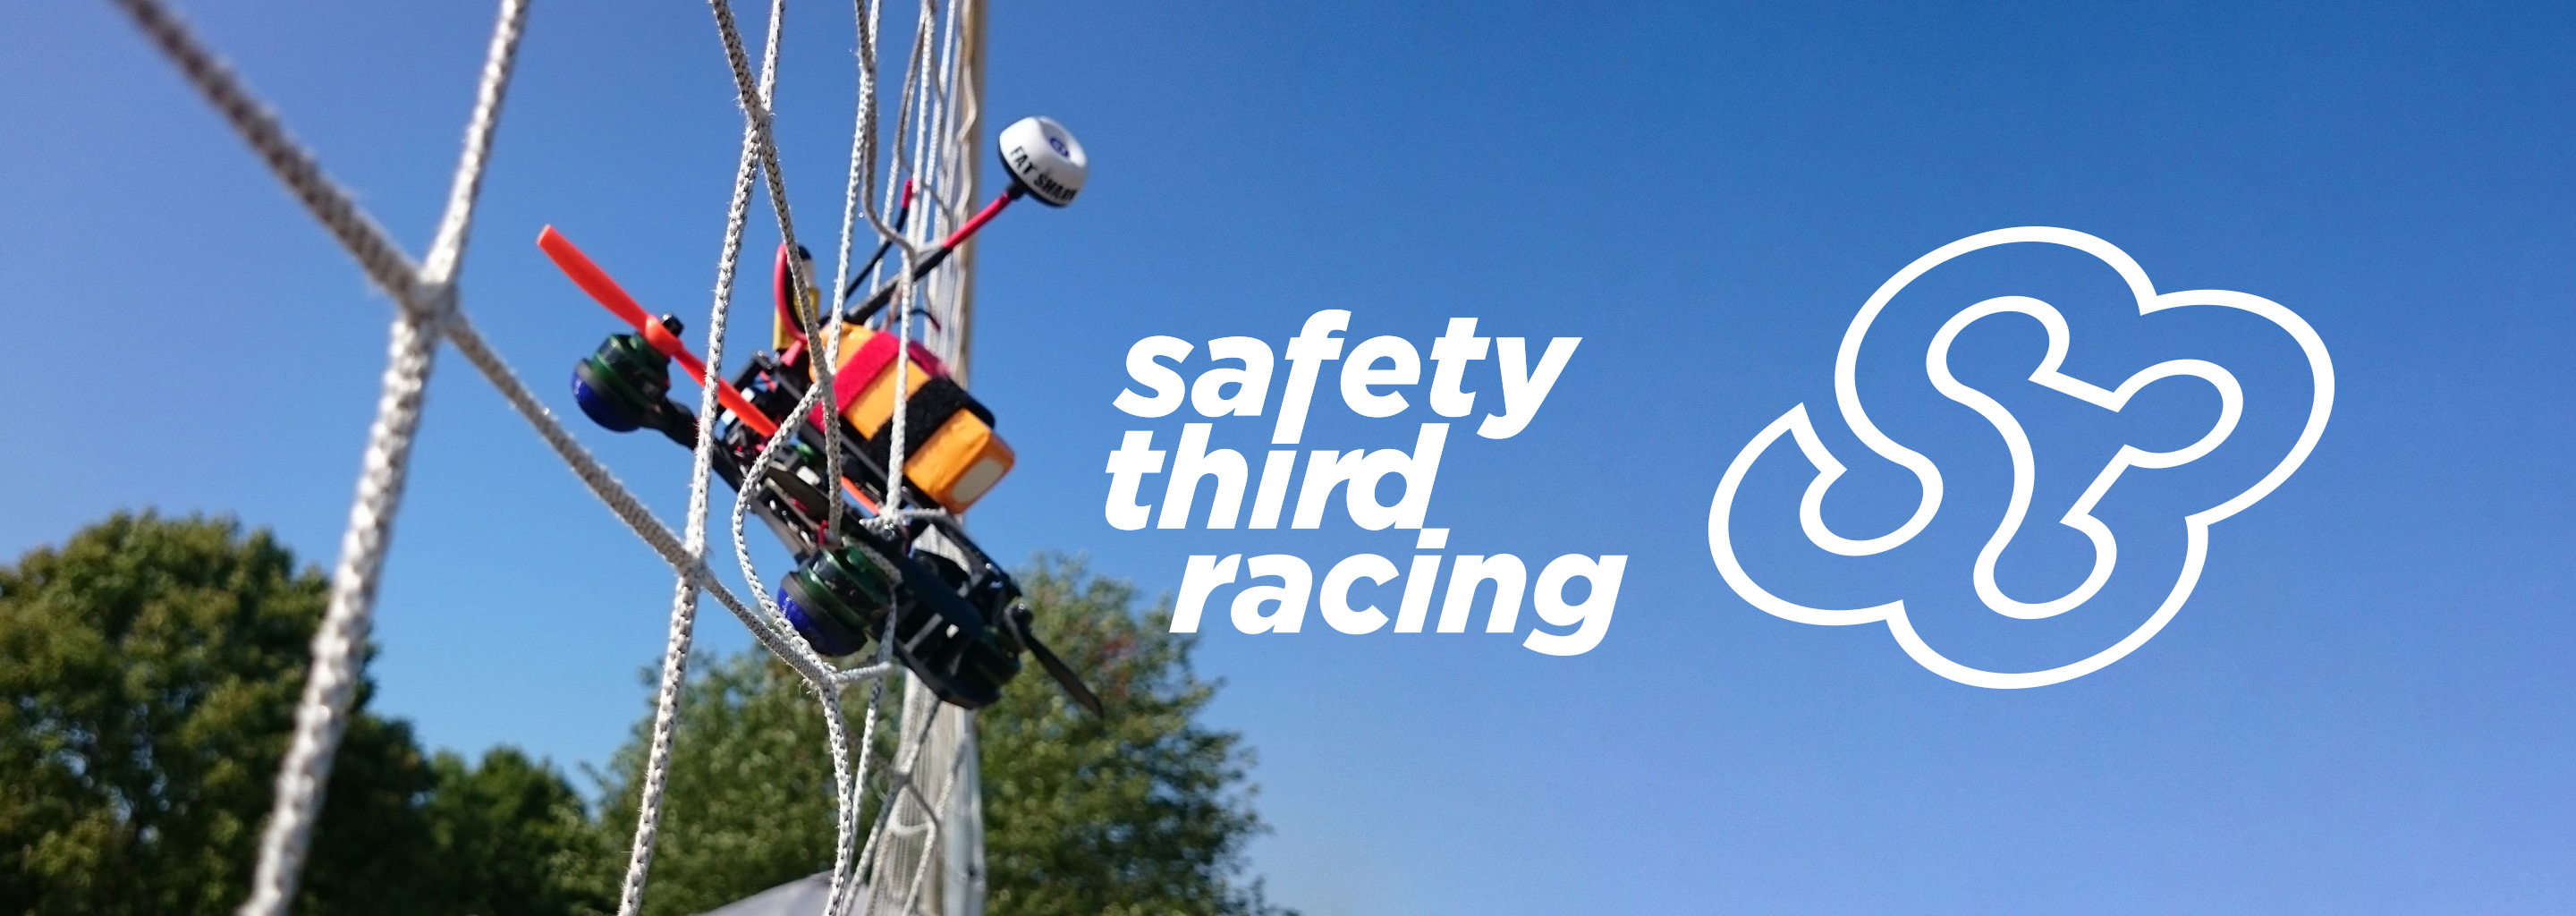 Safety Third Racing